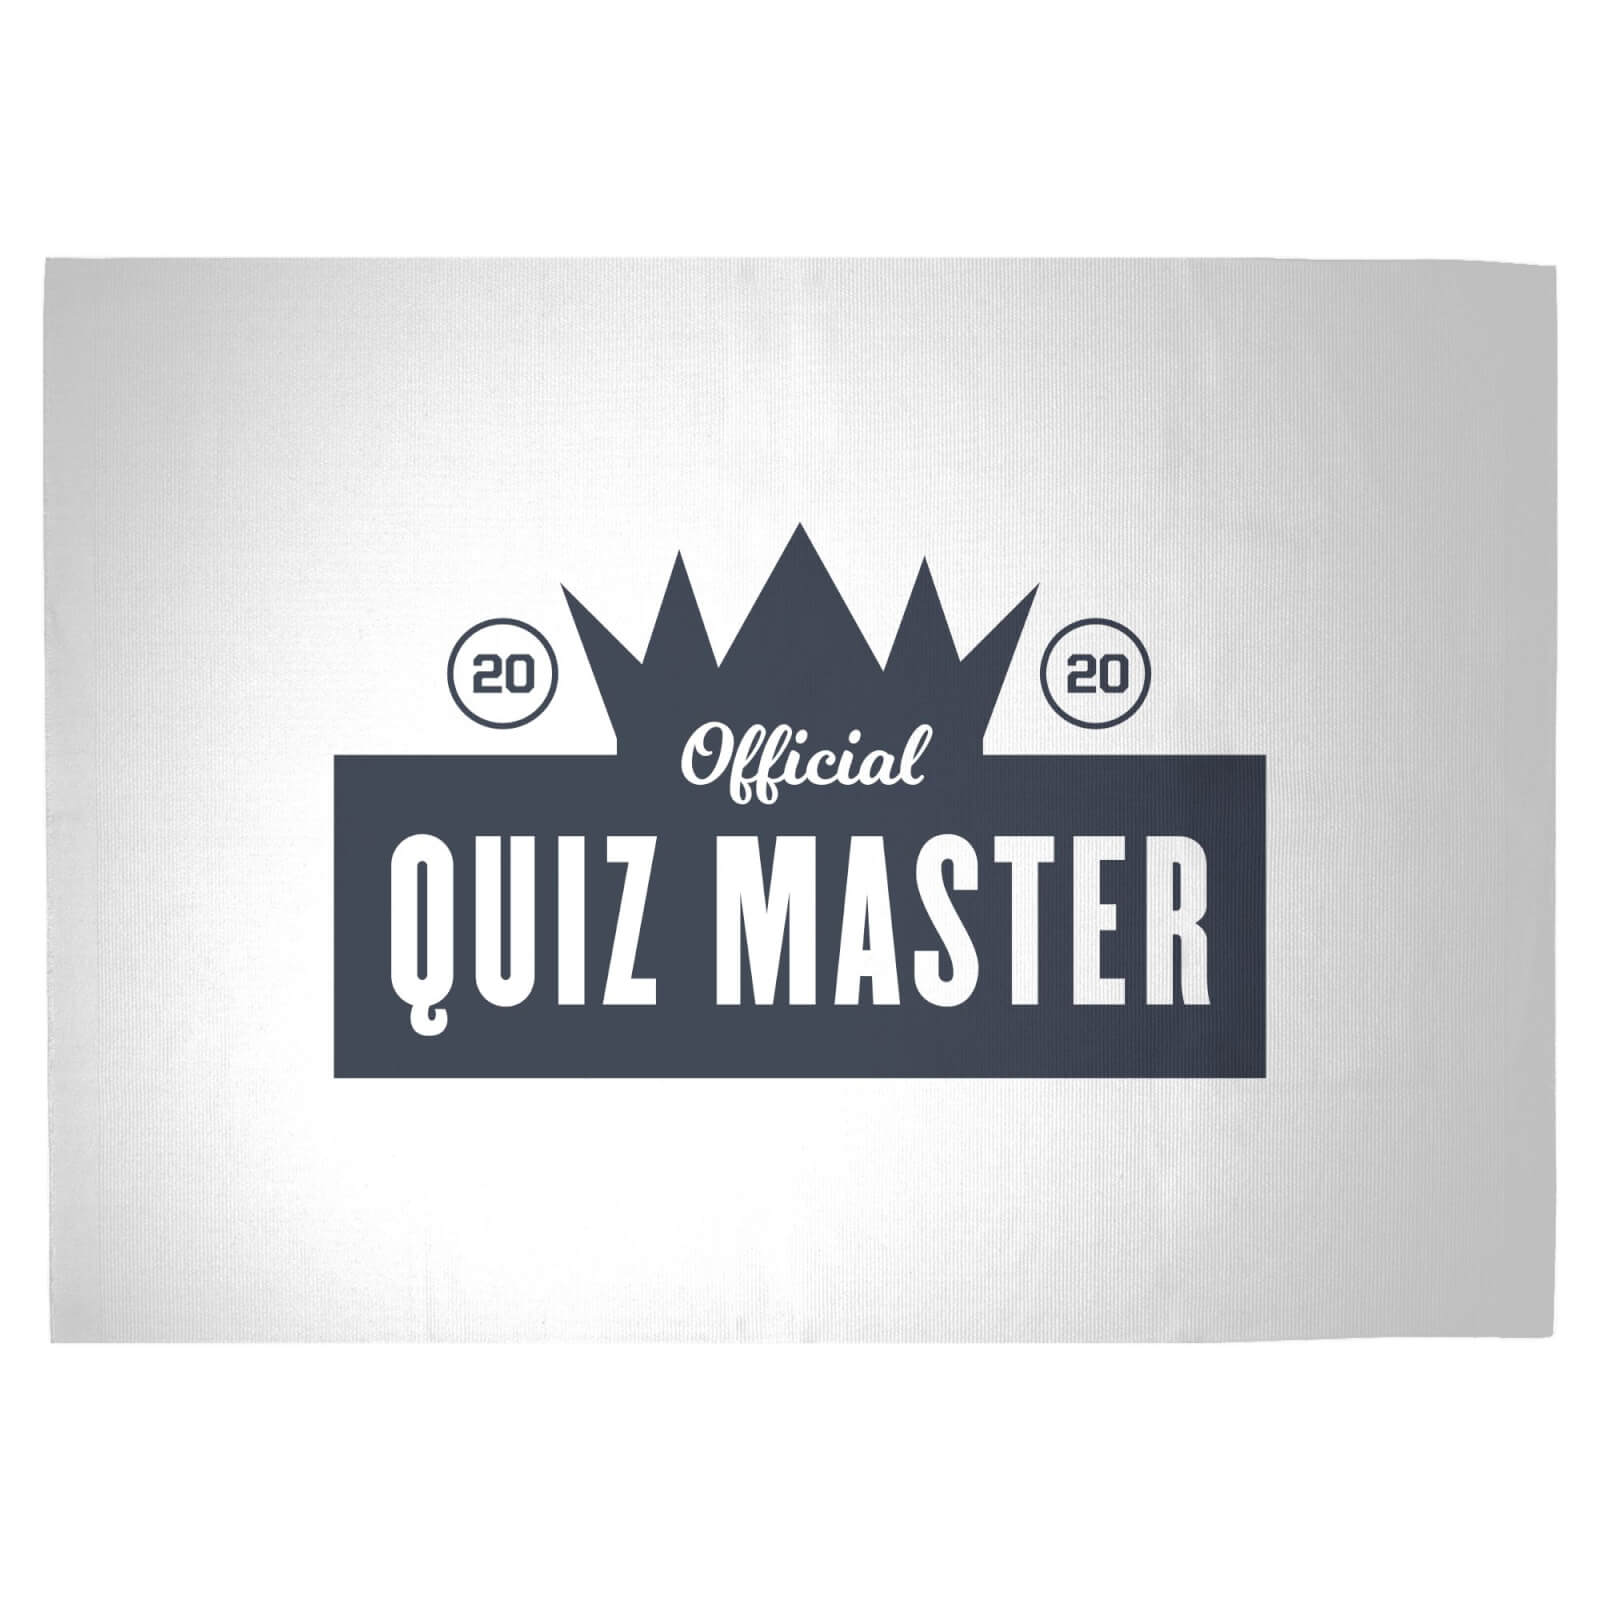 Official Quiz Master Woven Rug - Large